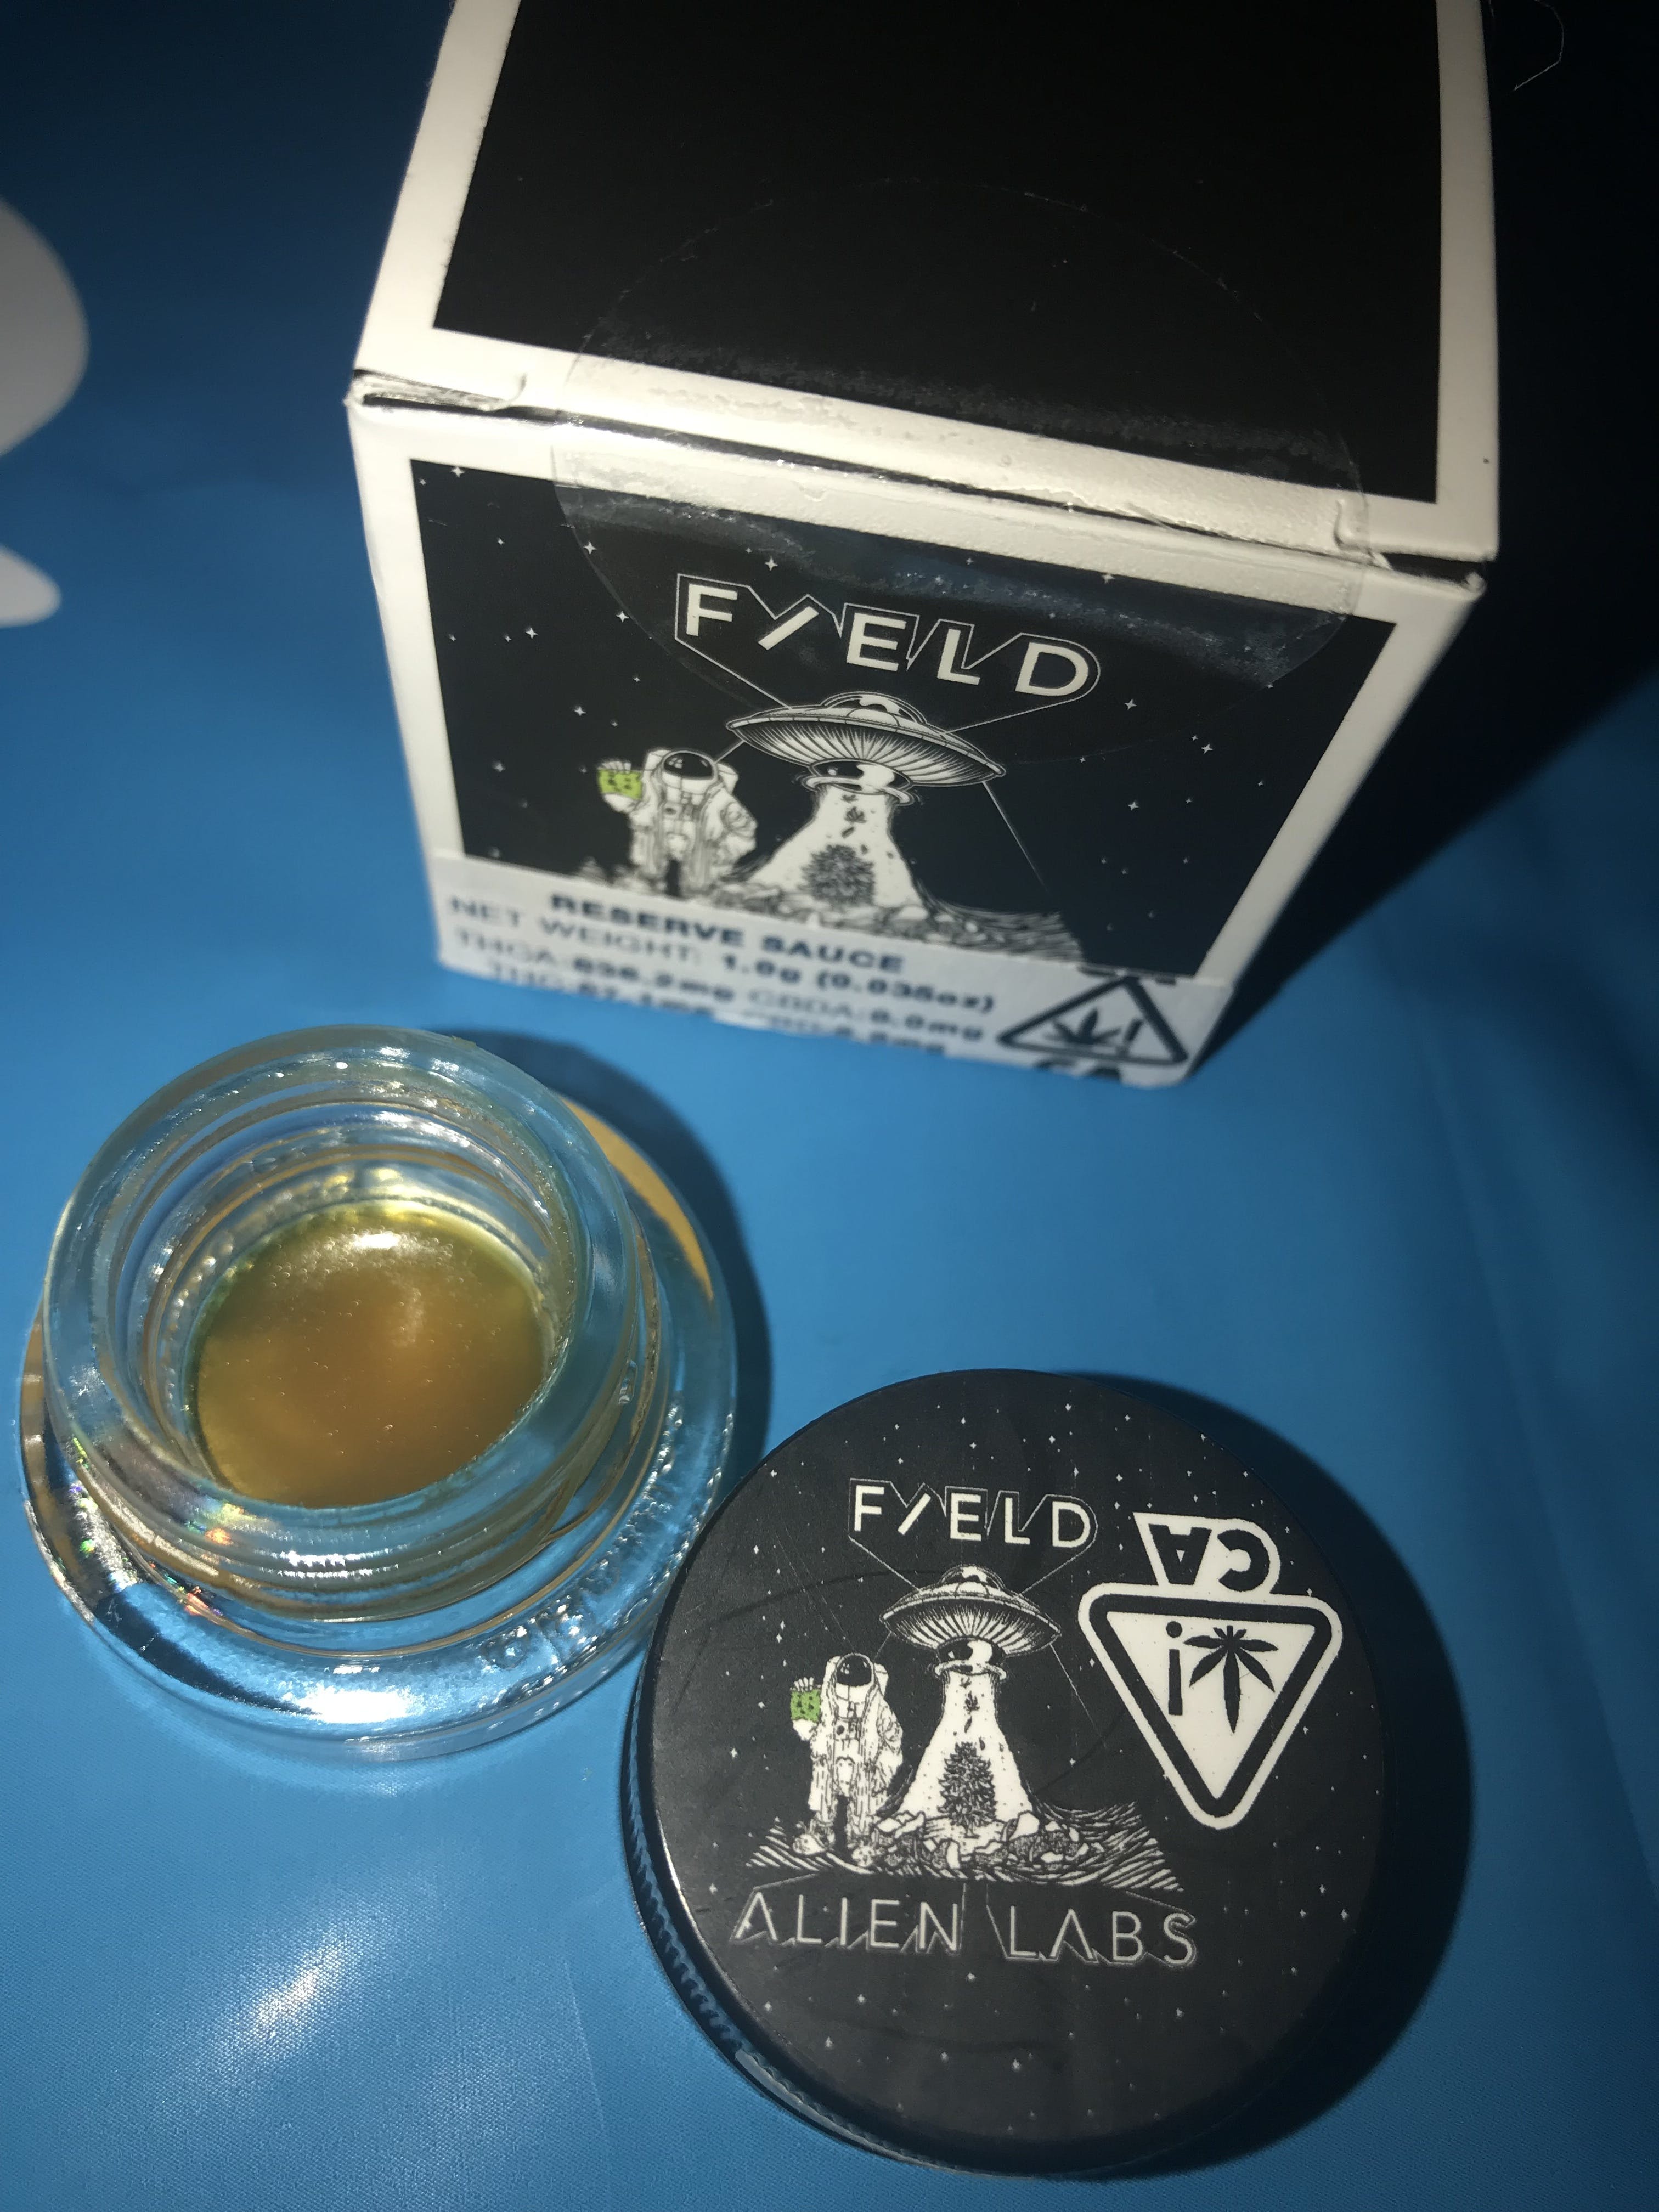 concentrate-alien-labs-x-field-extracts-wifi-x-gelato-33-reserve-sauce